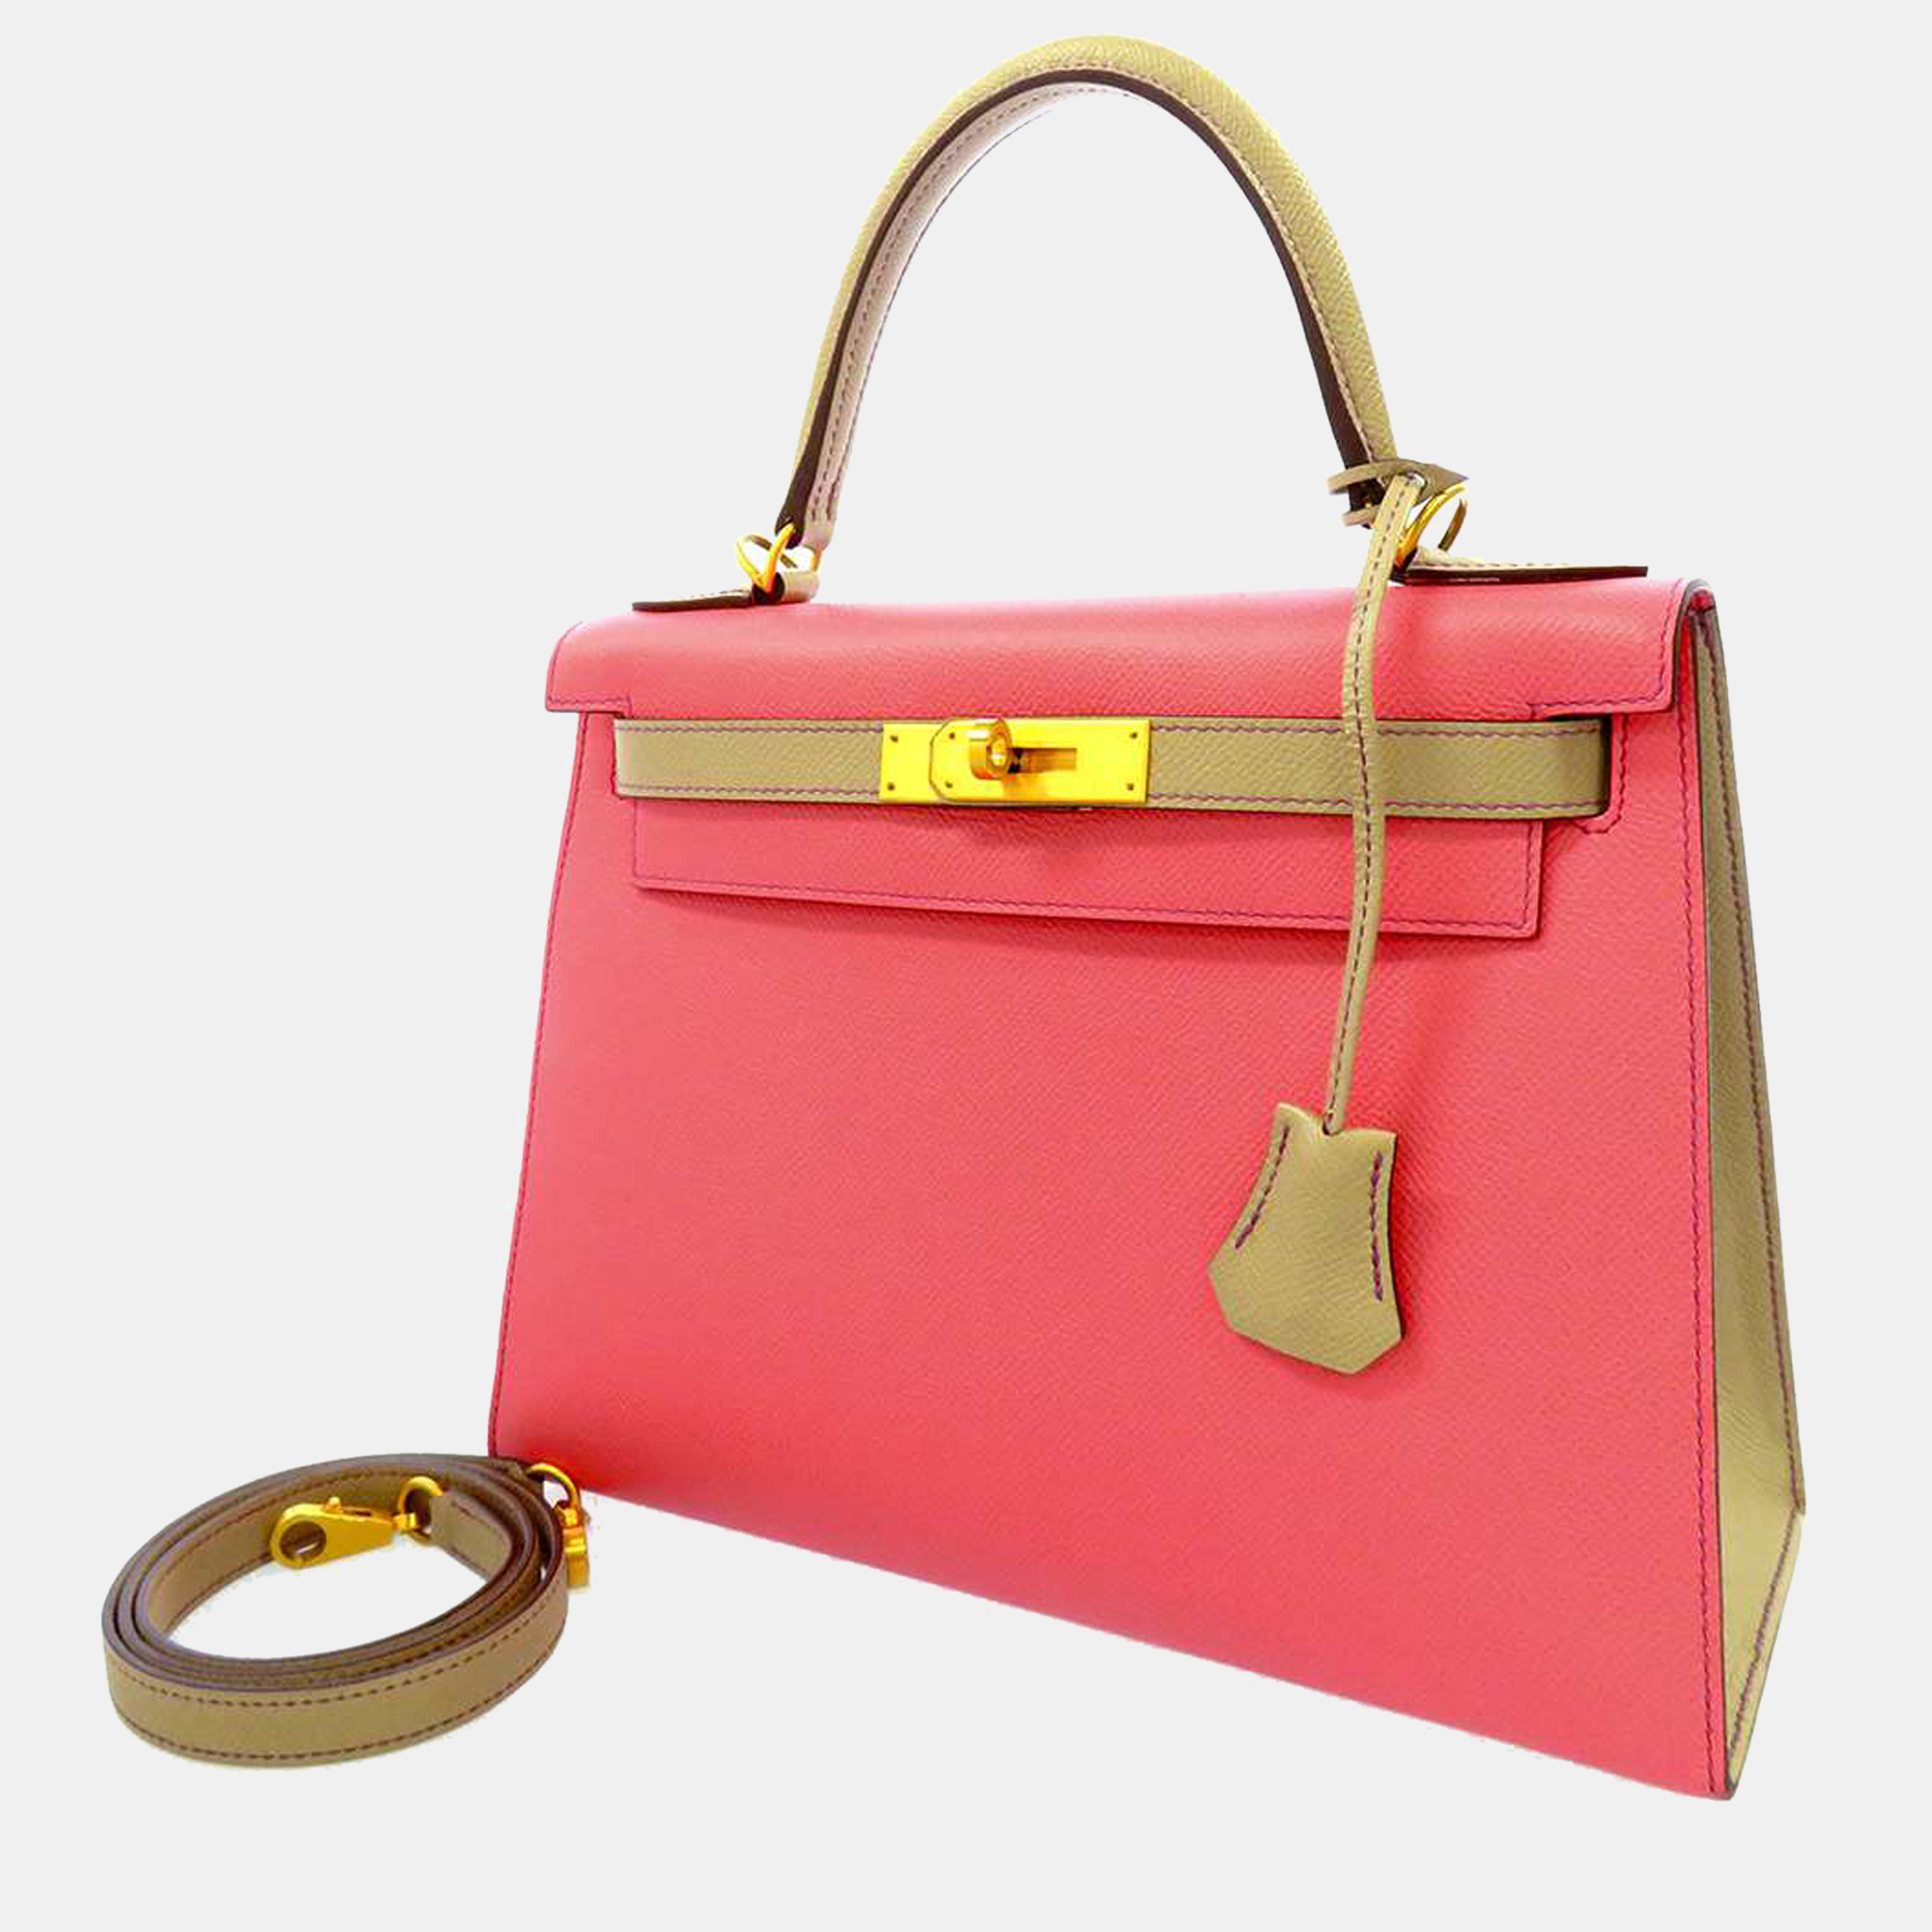 Hermes Pink/Trench Epsom Leather Gold Hardware Special Order Kelly Sellier 28 Bag